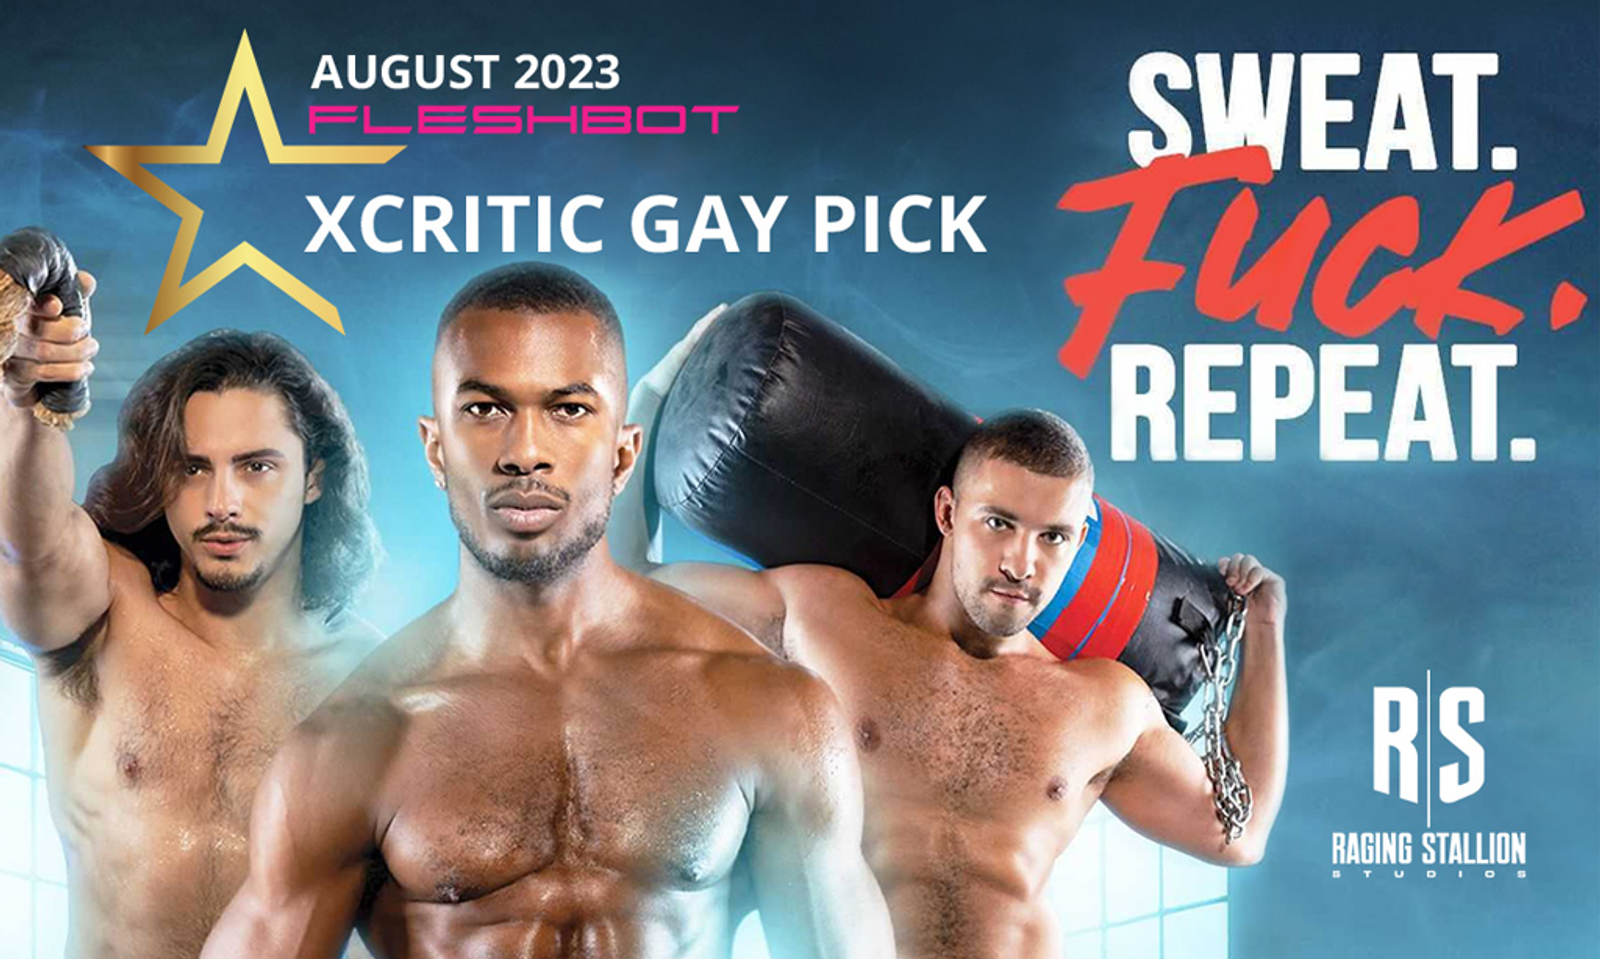 'Sweat. Fuck. Repeat.' Is Fleshbot's August XCritic Gay Pick